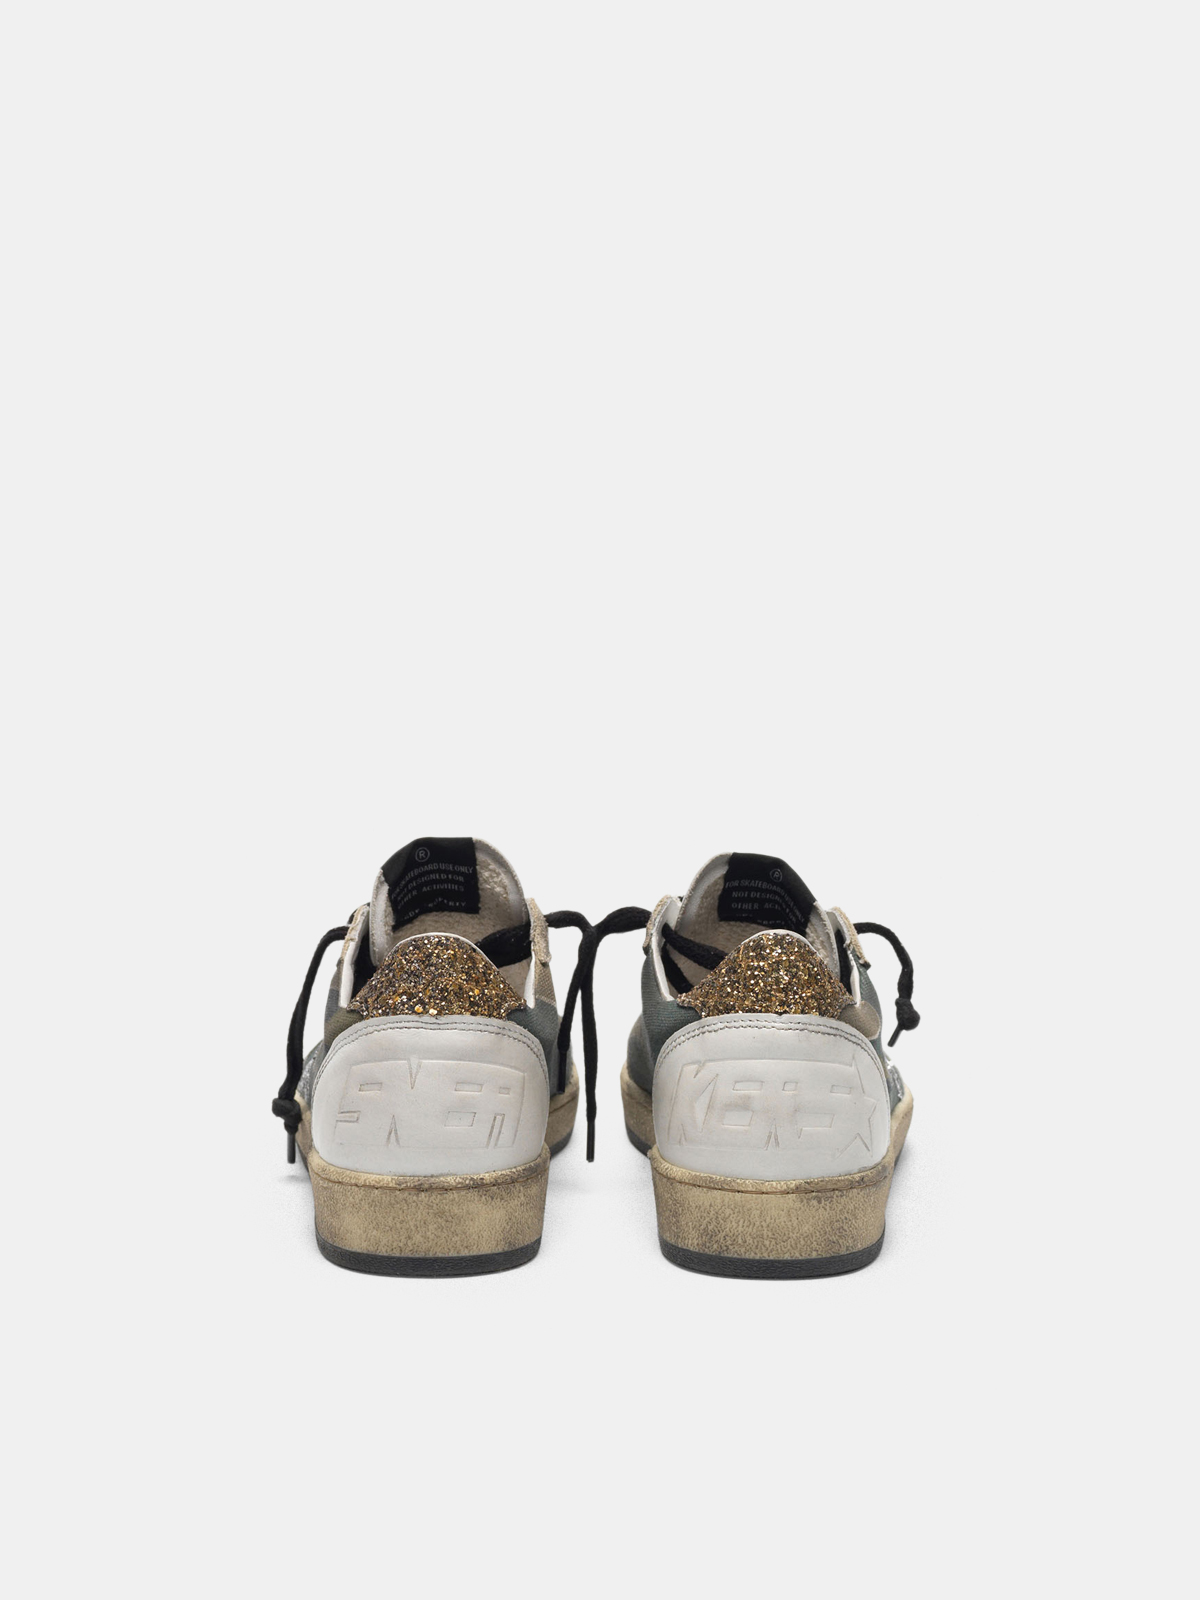 Camouflage Ball Star sneakers with glittery star and heel tab | Golden Goose